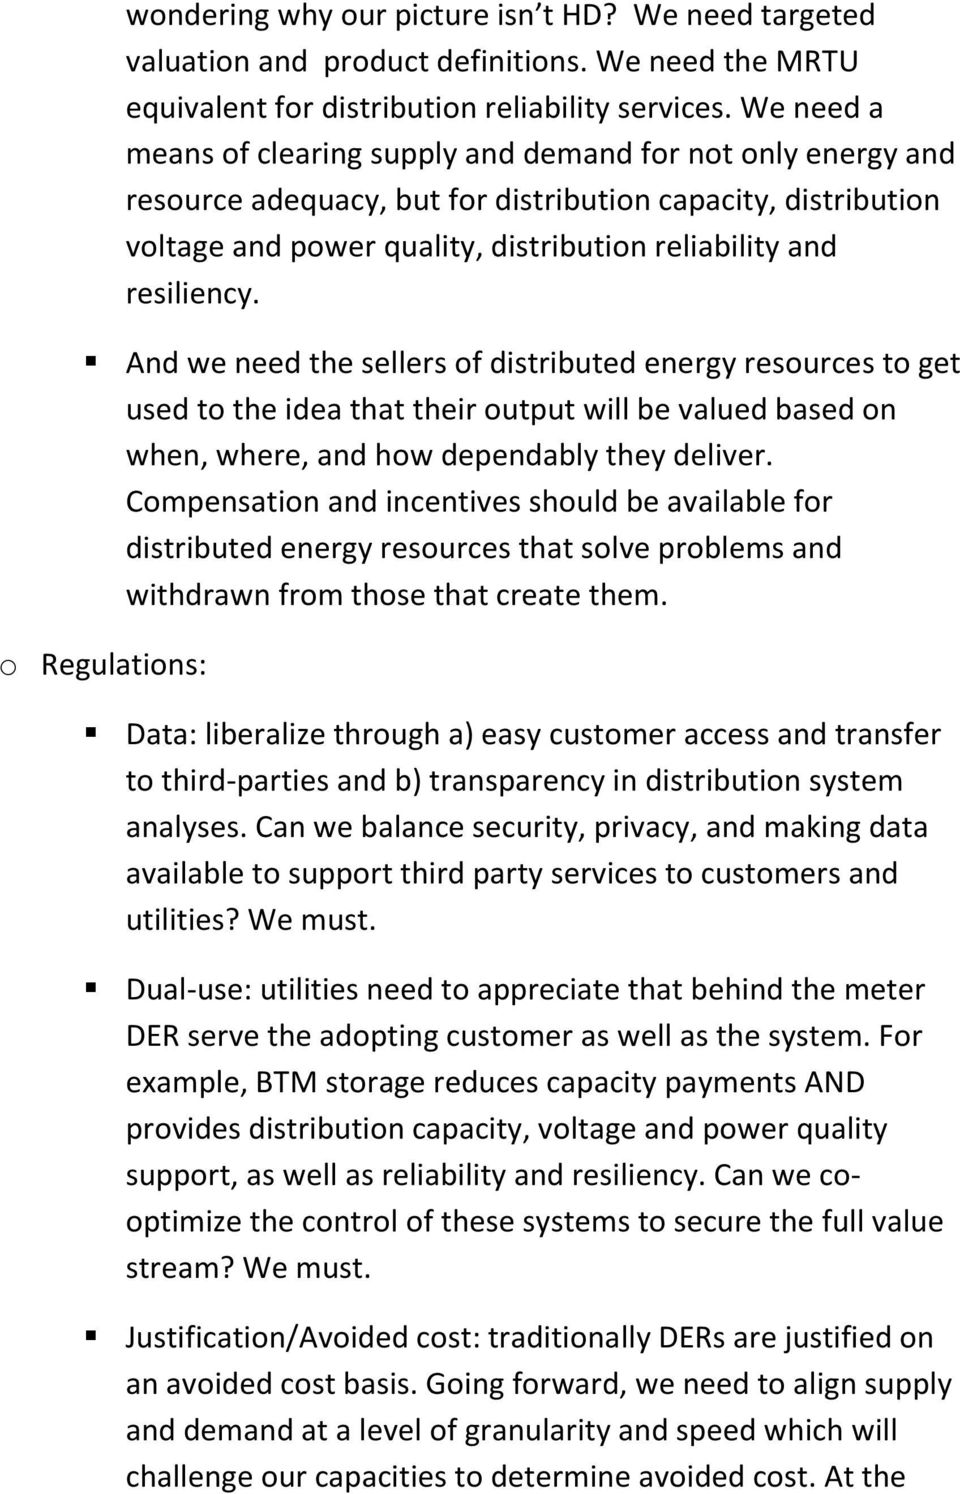 And we need the sellers of distributed energy resources to get used to the idea that their output will be valued based on when, where, and how dependably they deliver.